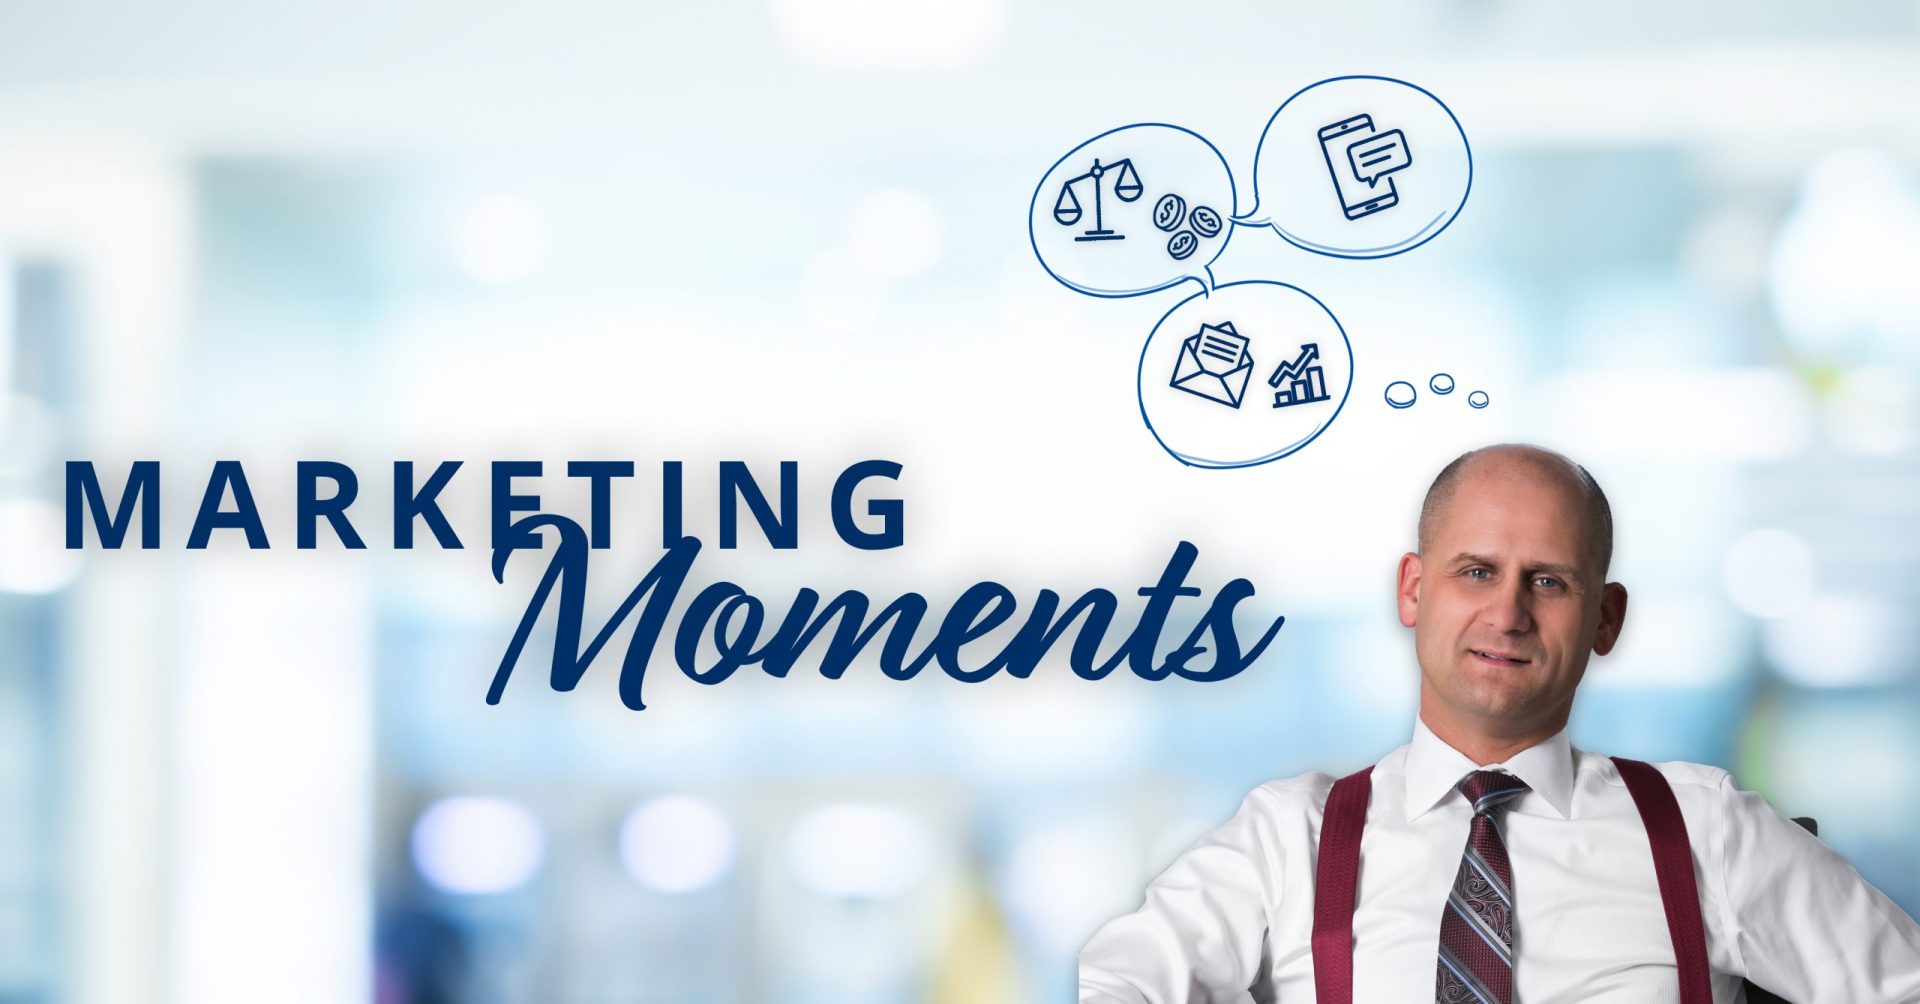 Marketing Moments podcast cover featuring attorney Thomas Repczynski